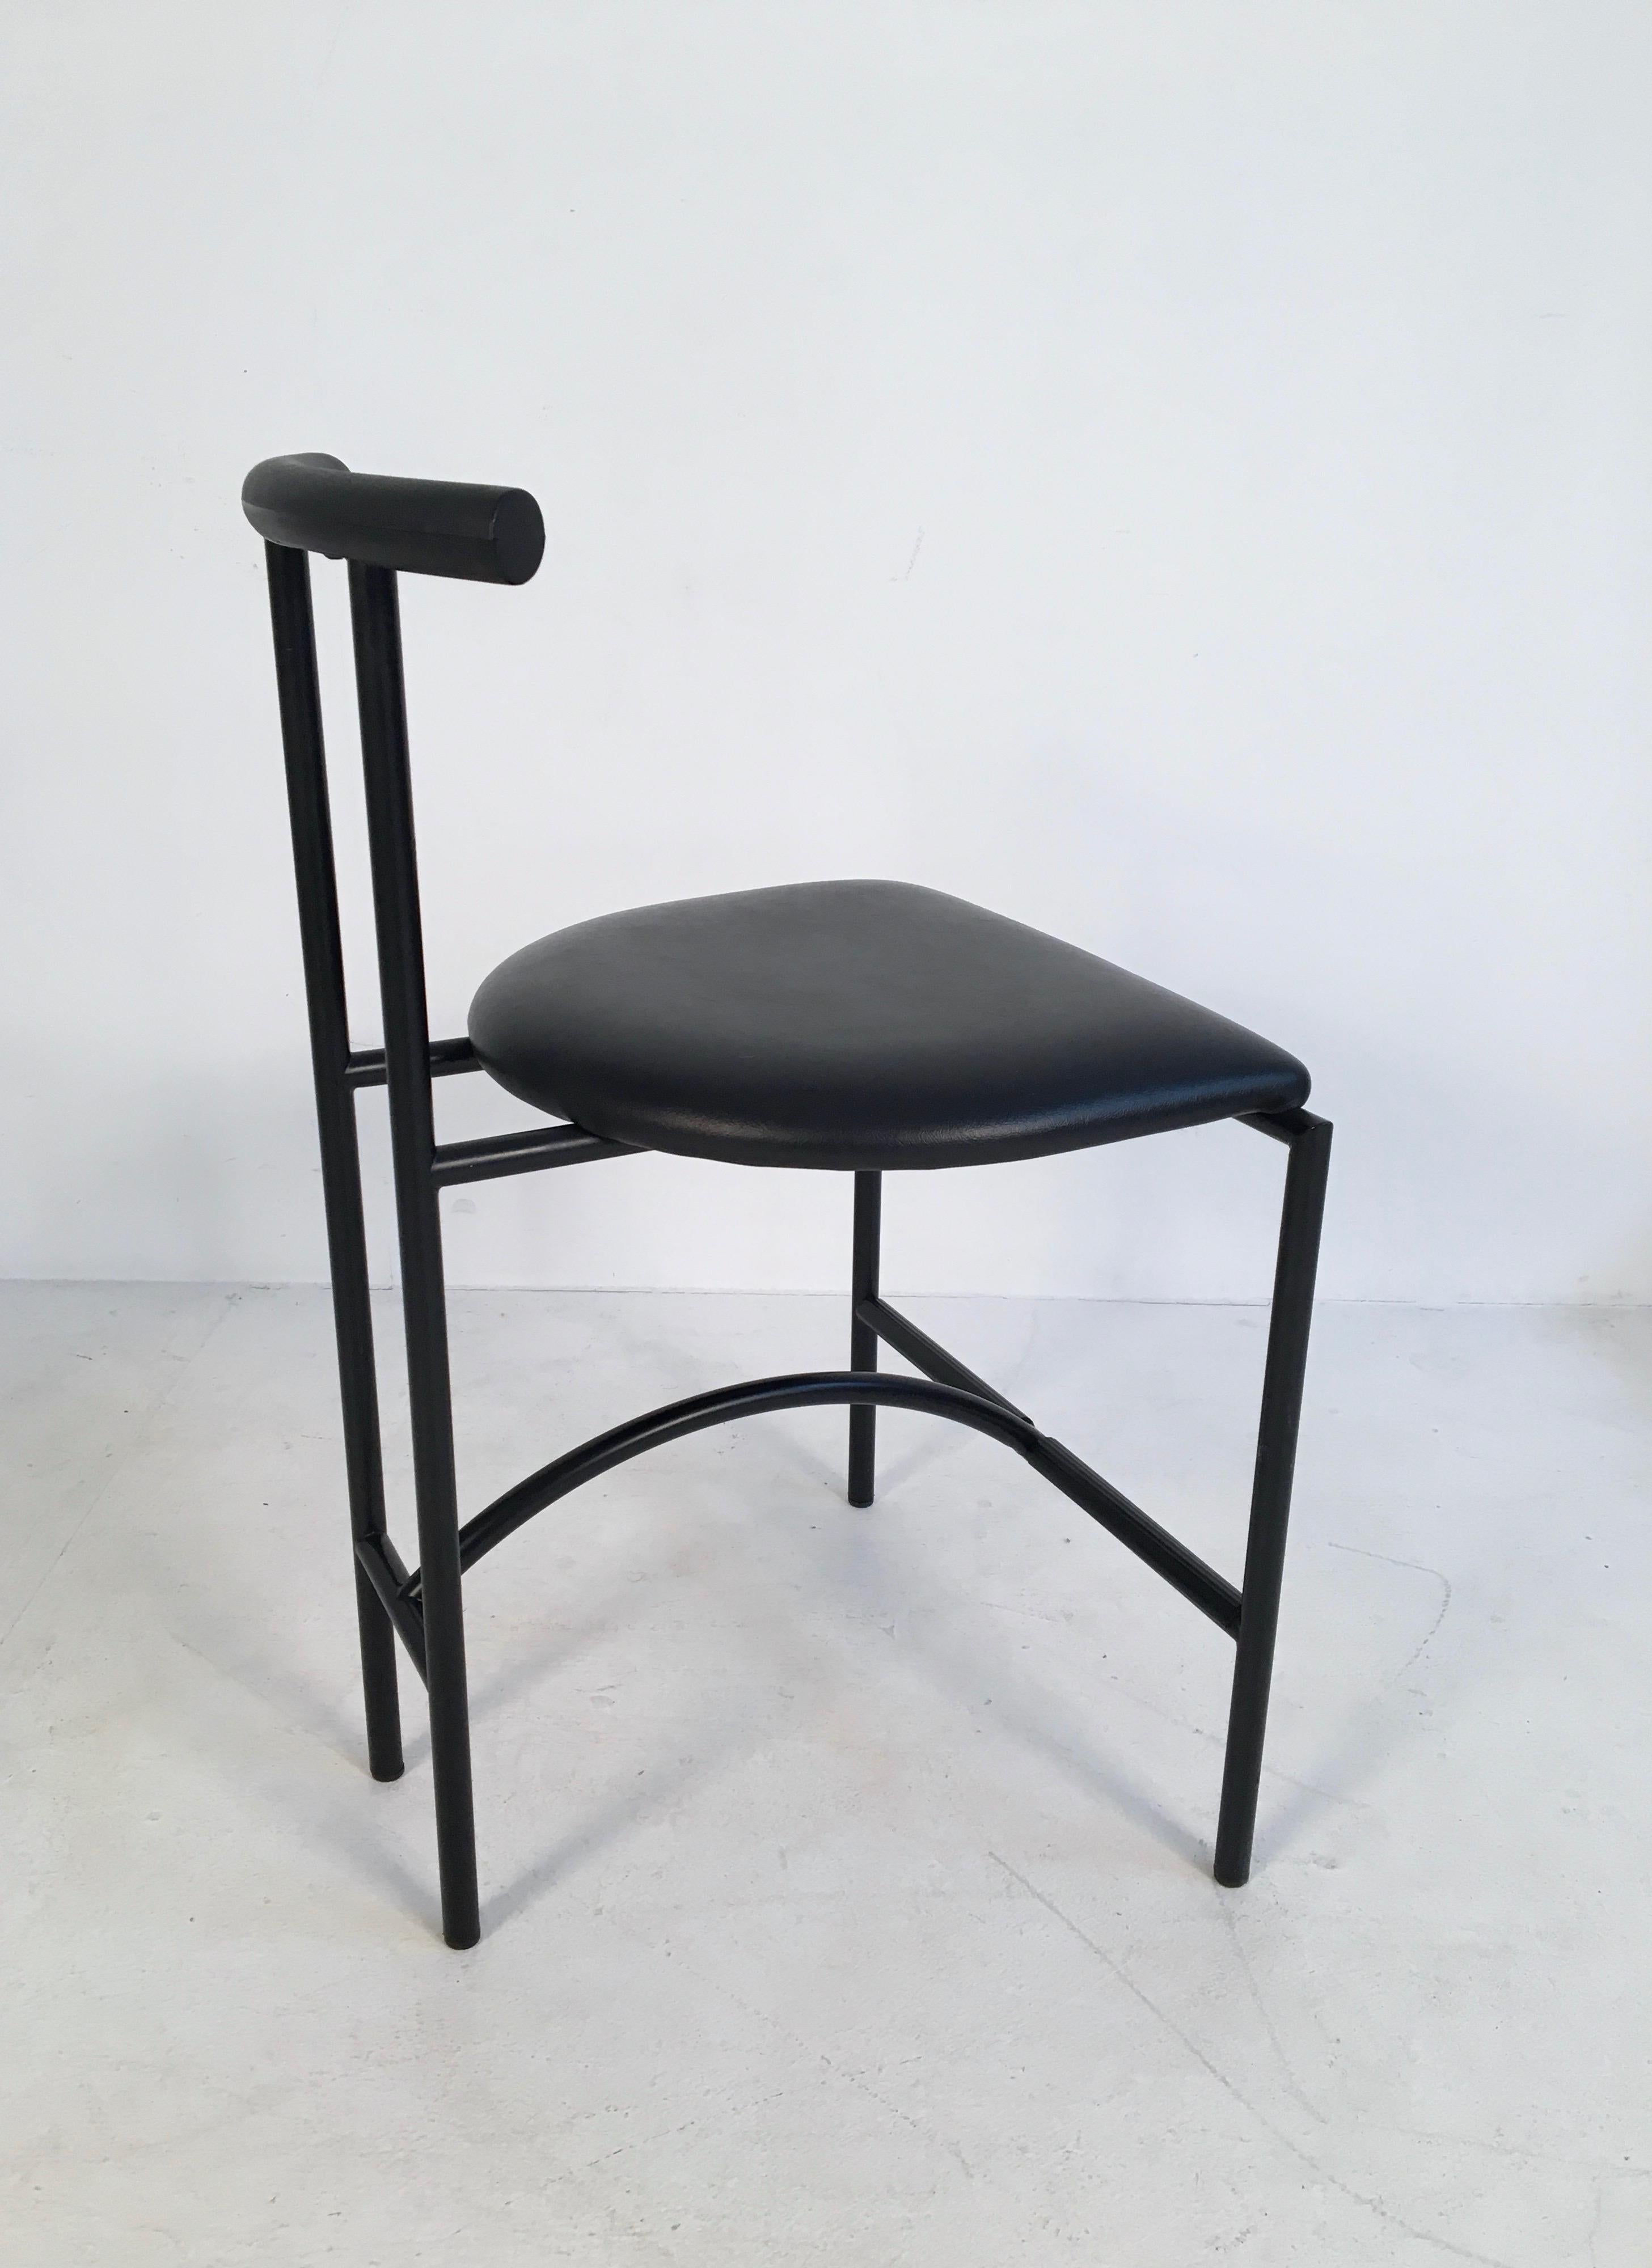 Tubular steel and vinyl chair designed by Rodney Kinsman and produced by OMK in the 1980s.